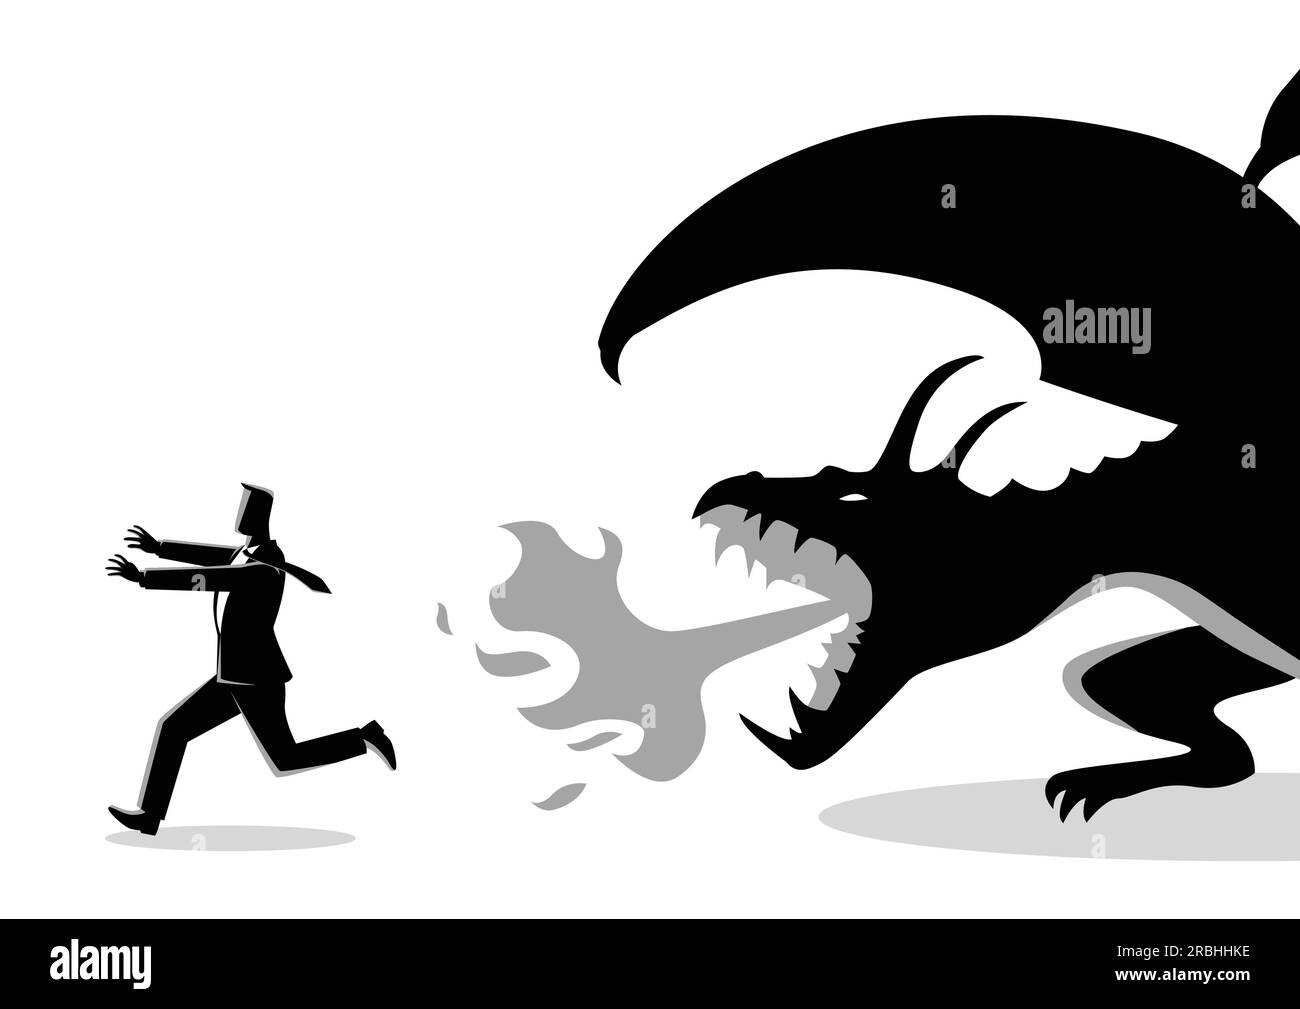 Business concept vector illustration of a businessman running away from a dragon. Risk, fear of challenges in business concept Stock Vector